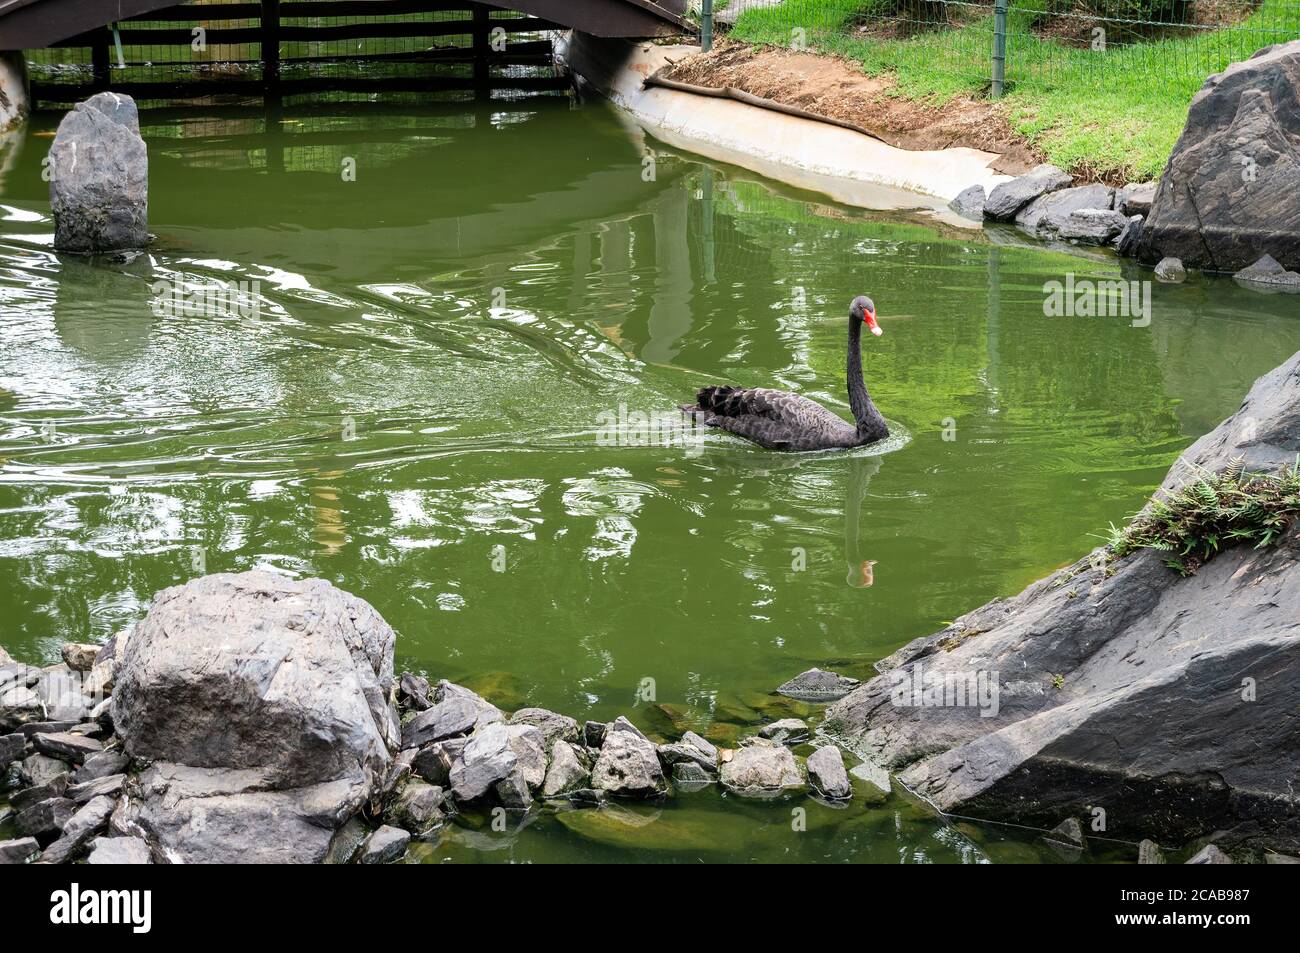 A Black swan (Cygnus atratus - a large waterbird) swimming on the artificial lake of the japanese garden of Belo Horizonte Zoological garden. Stock Photo